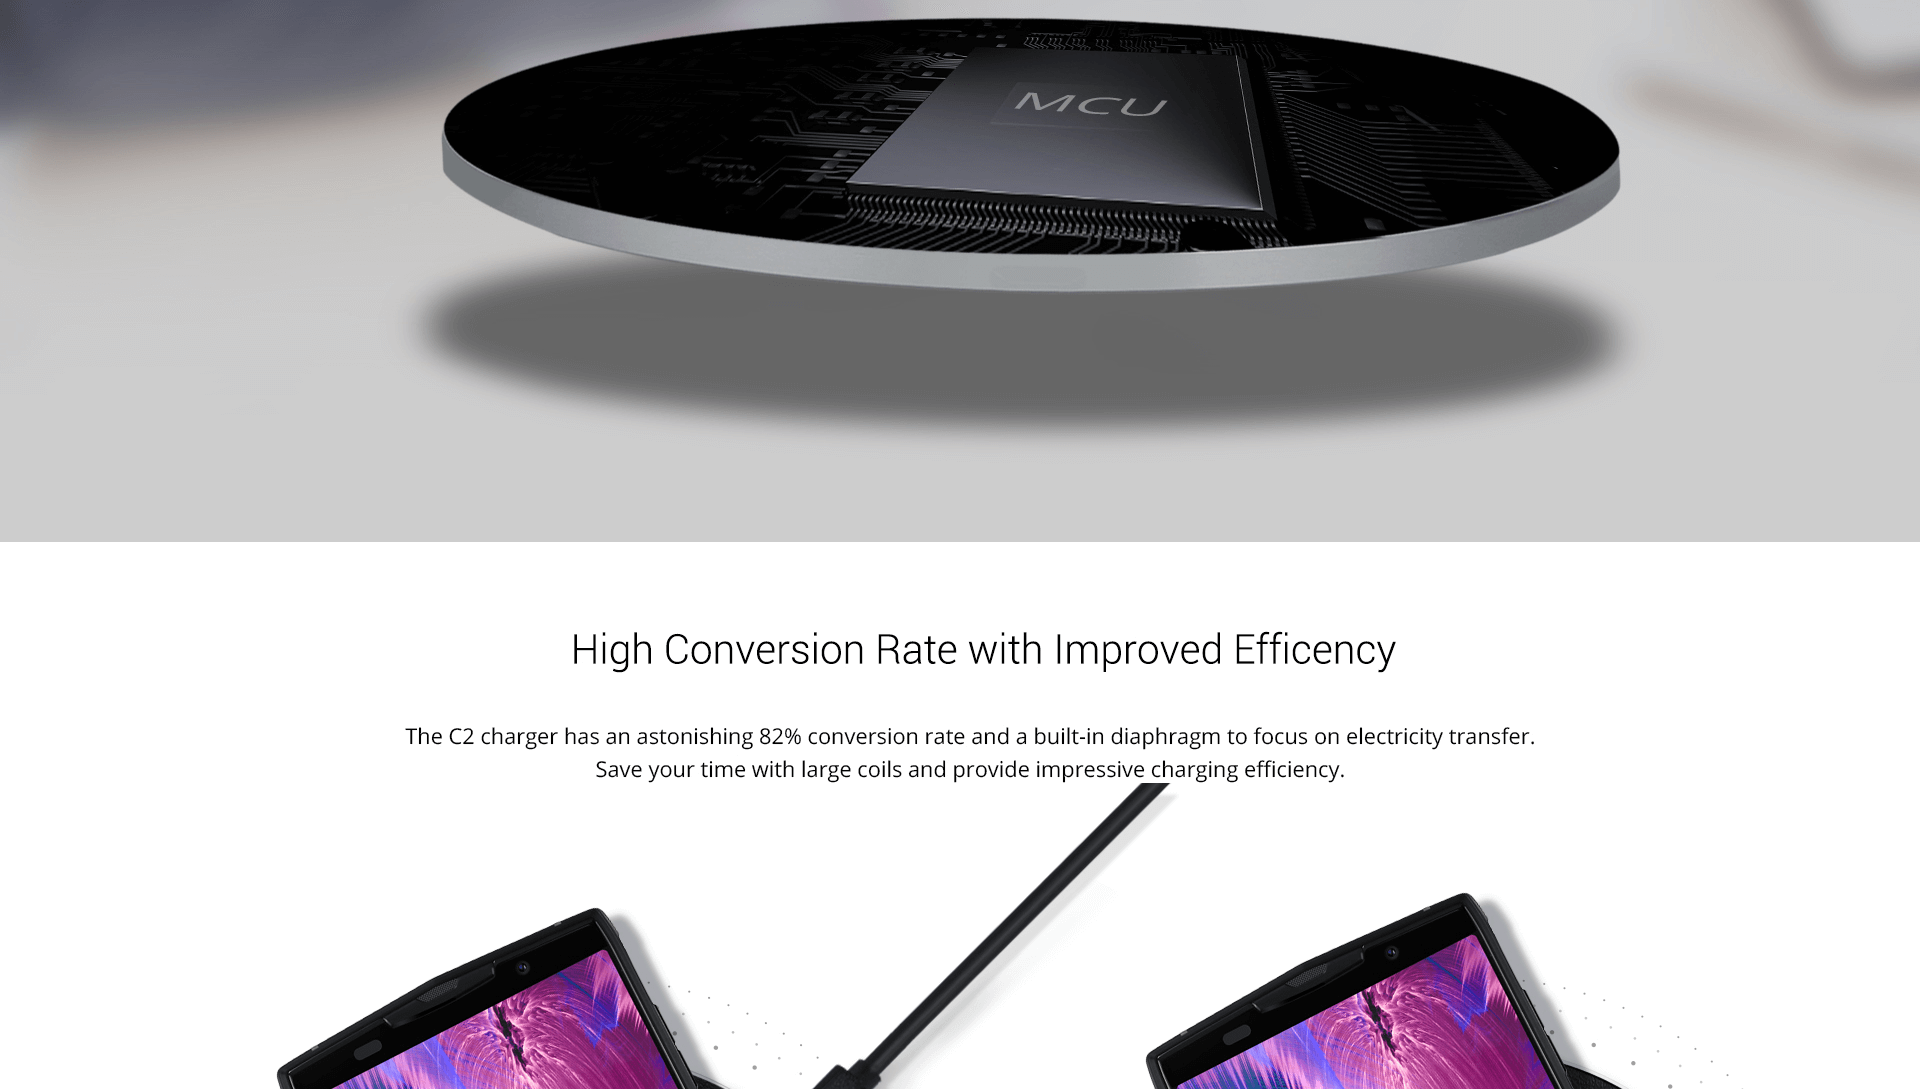 Doogee Wireless Charger